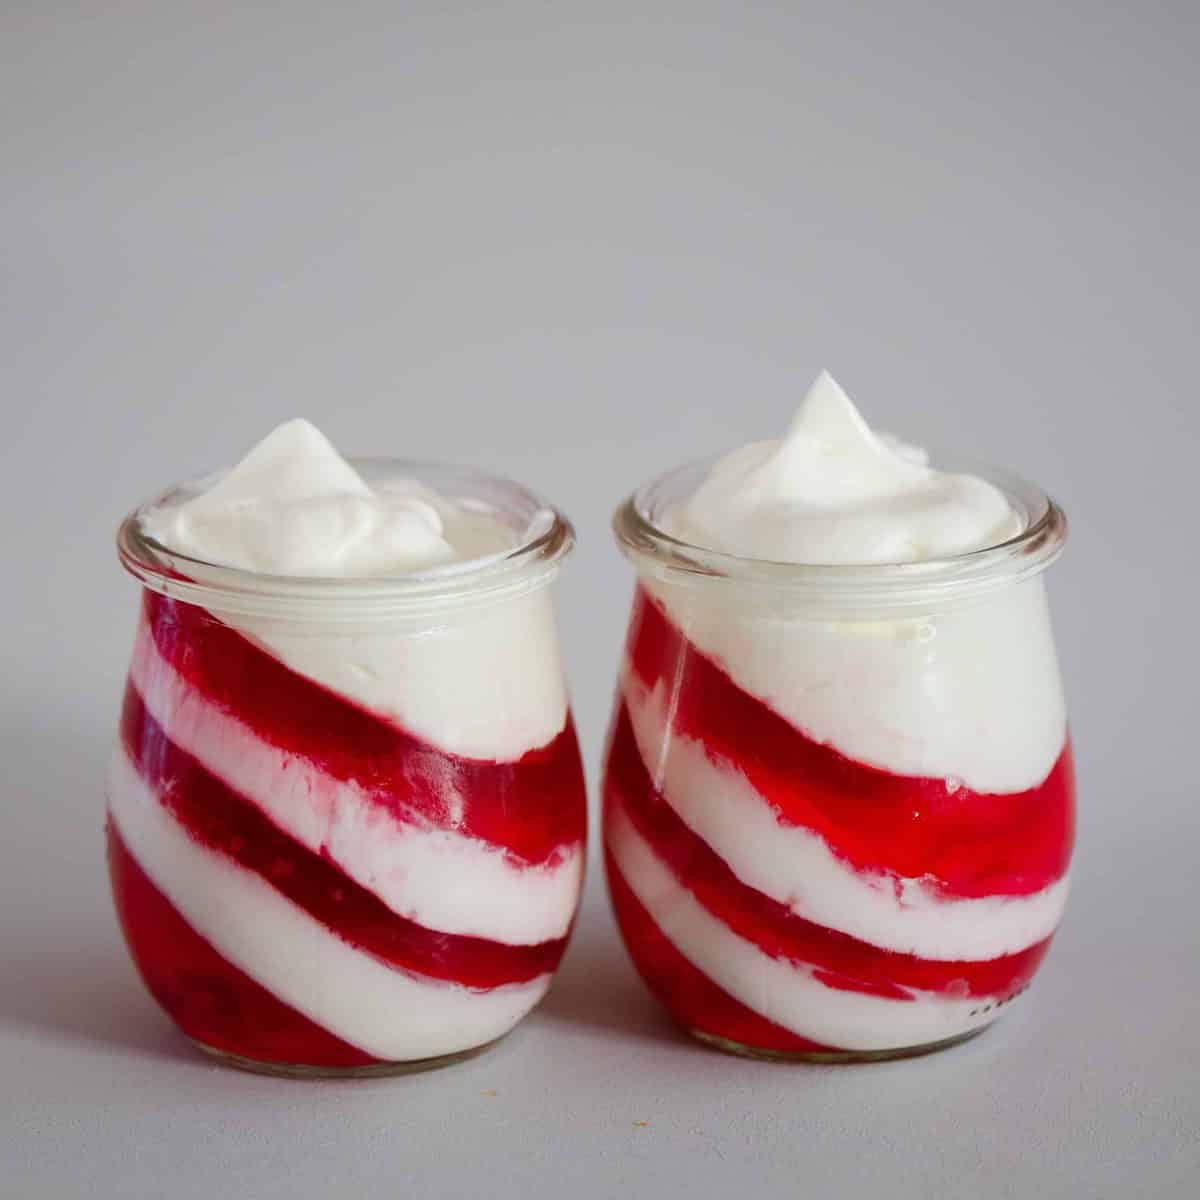 Candy cane jars with yogurt and strawberry jelly